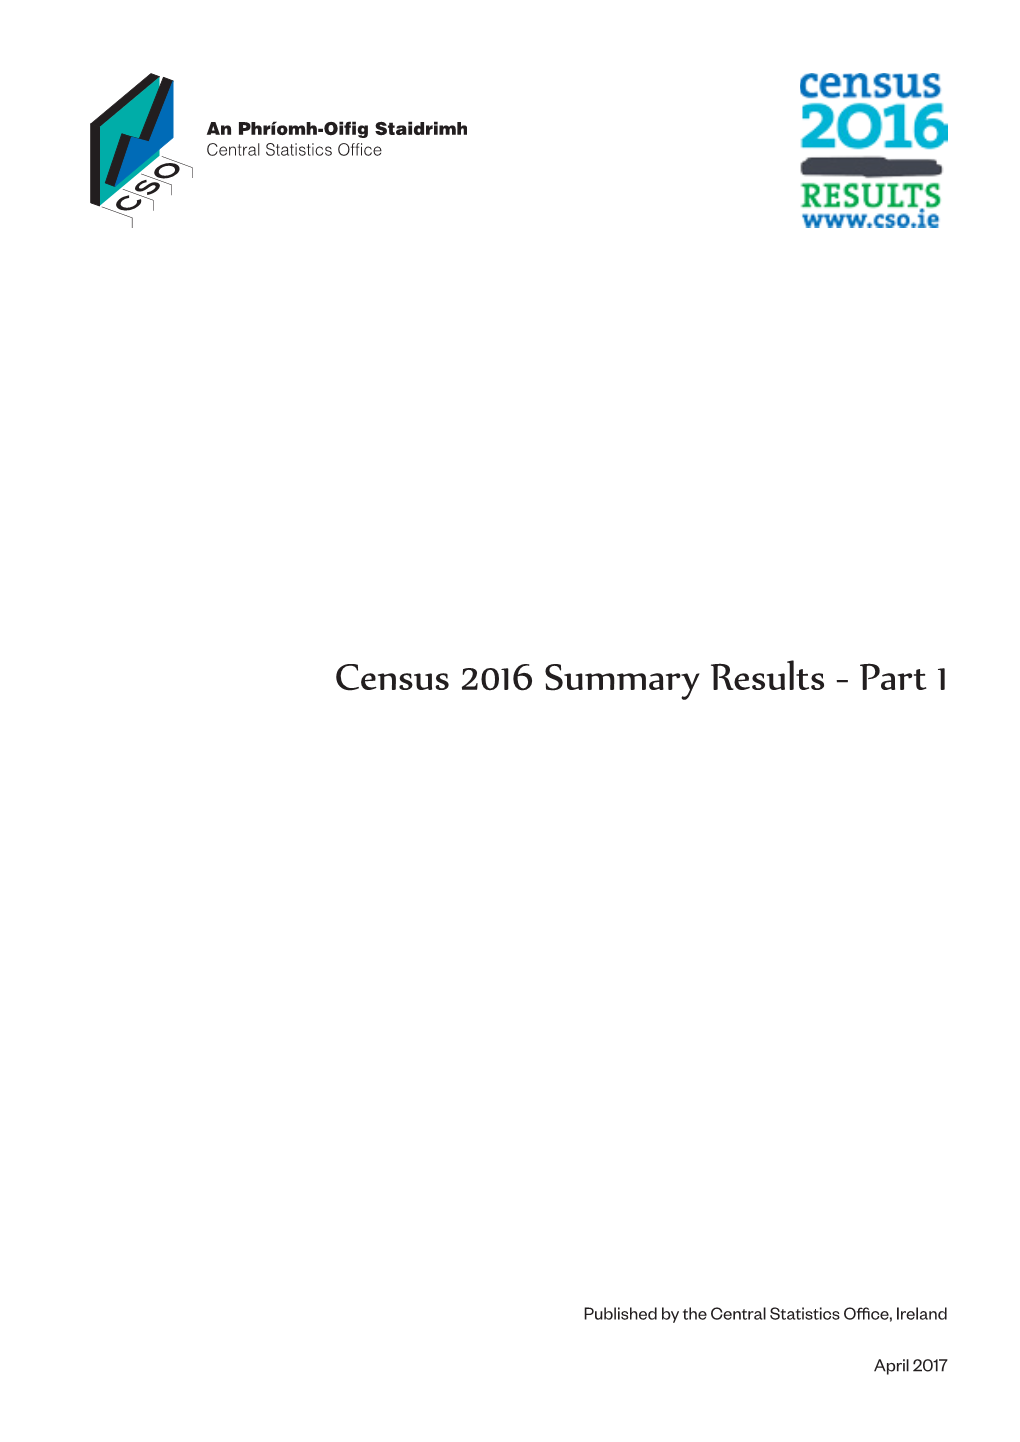 Census 2016 Summary Results - Part 1